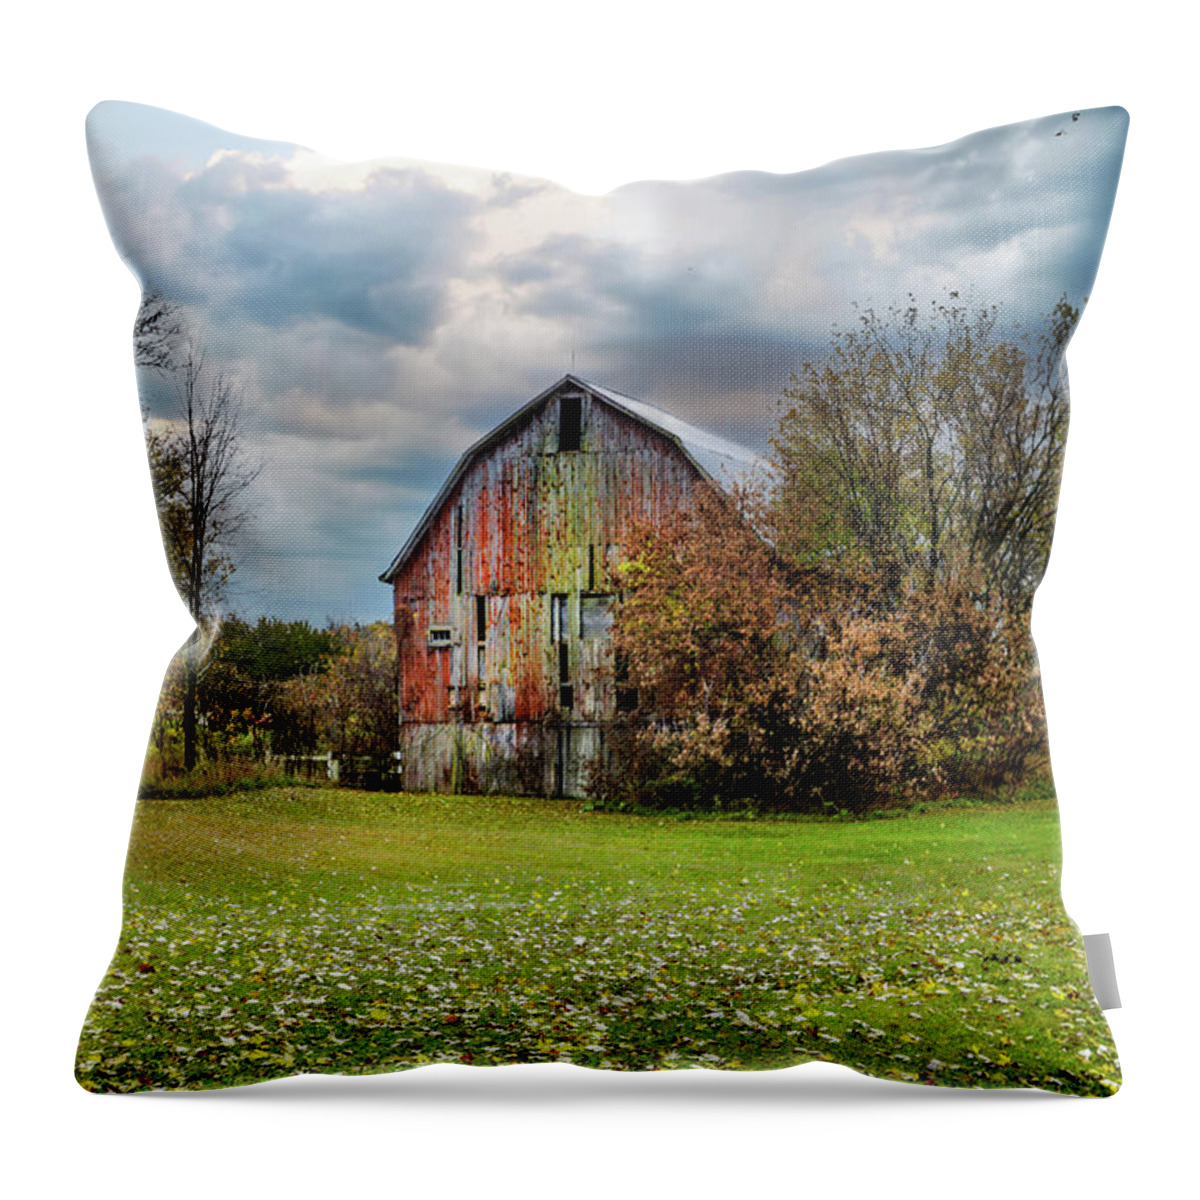 Northernmichigan Throw Pillow featuring the photograph Old Barn In Metamora DSC_0720 by Michael Thomas